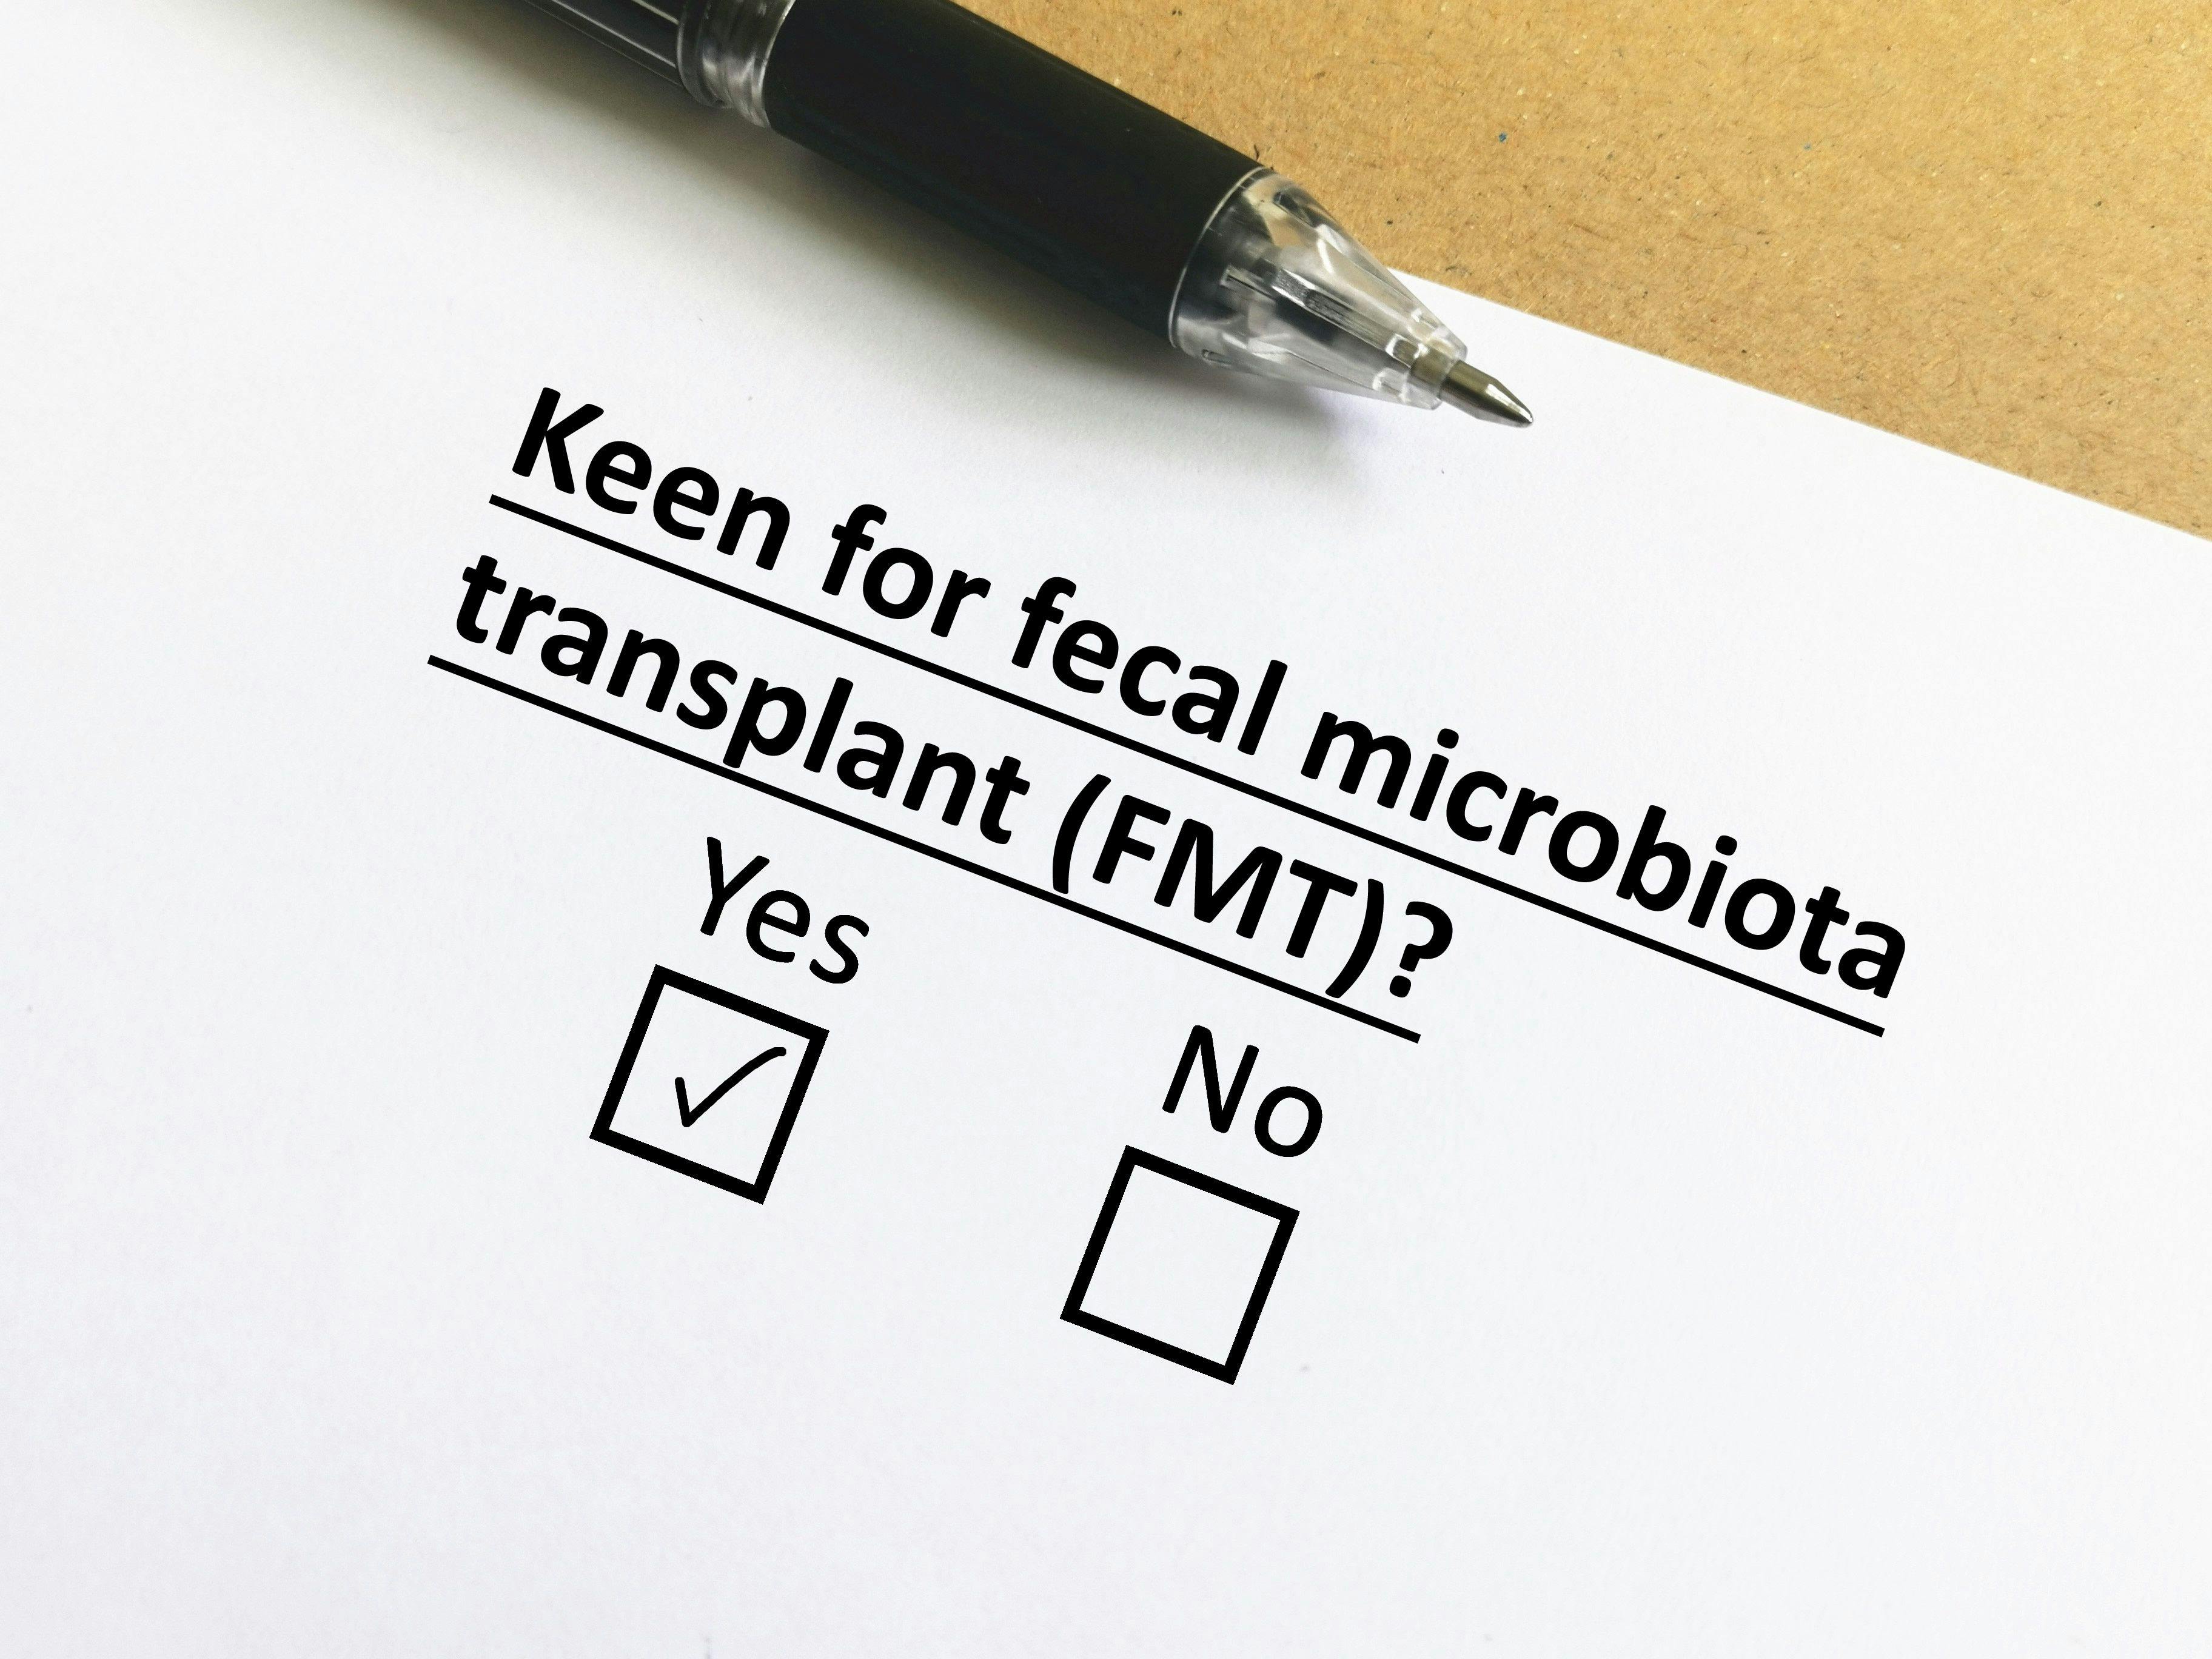  Fecal microbiota transplantation (FMT) is known to be an effective treatment for recurrent Clostridioides difficile infection. New research from the UVA School of Medicine reveals why.